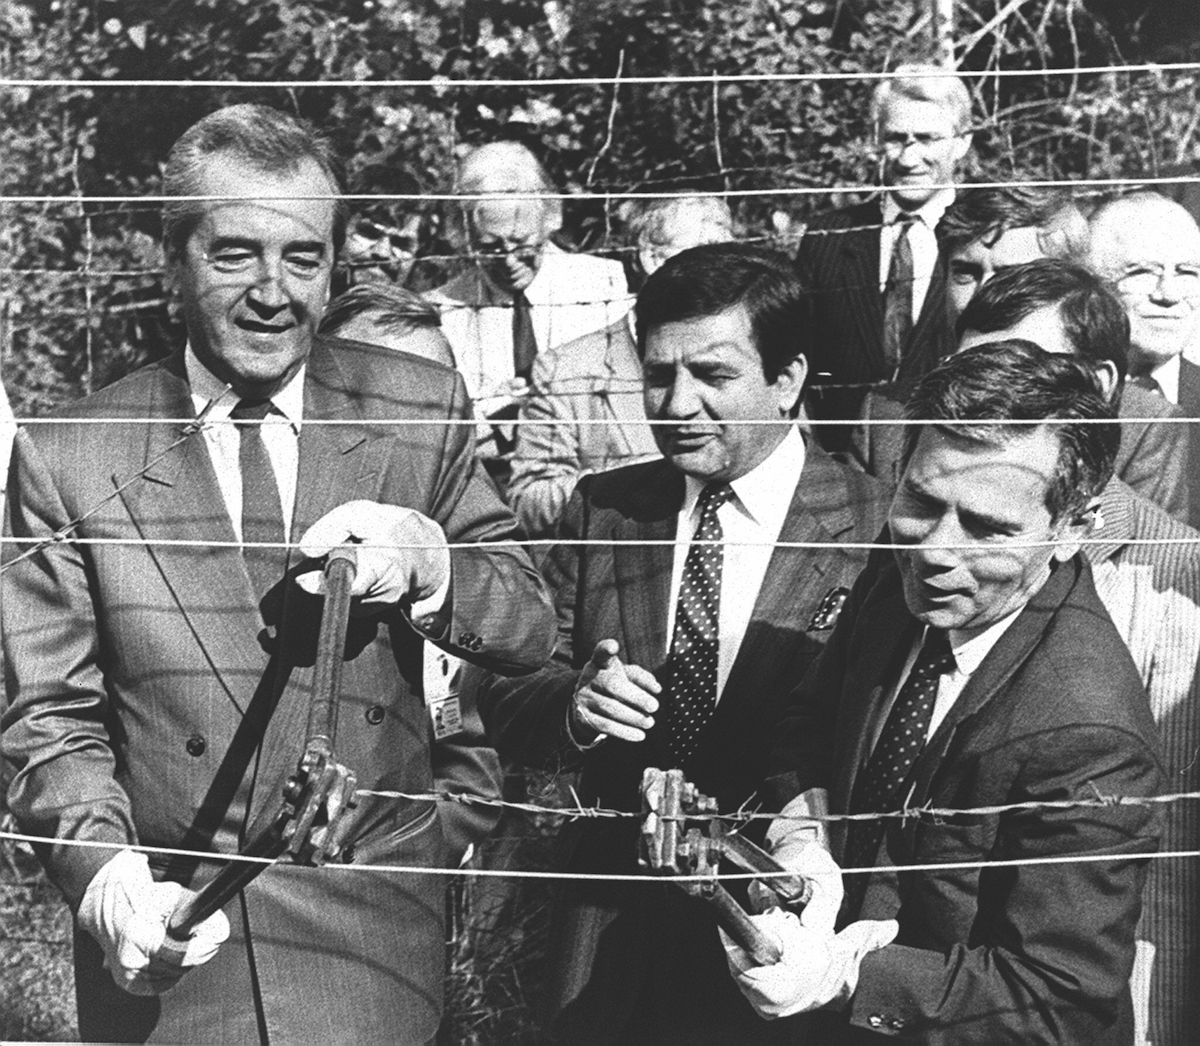 Hungarian foreign minister Gyula Horn cuts through barbed wire along the ‘Iron Curtain’, 27 June 1989. Associated Press/Alamy Stock Photo.